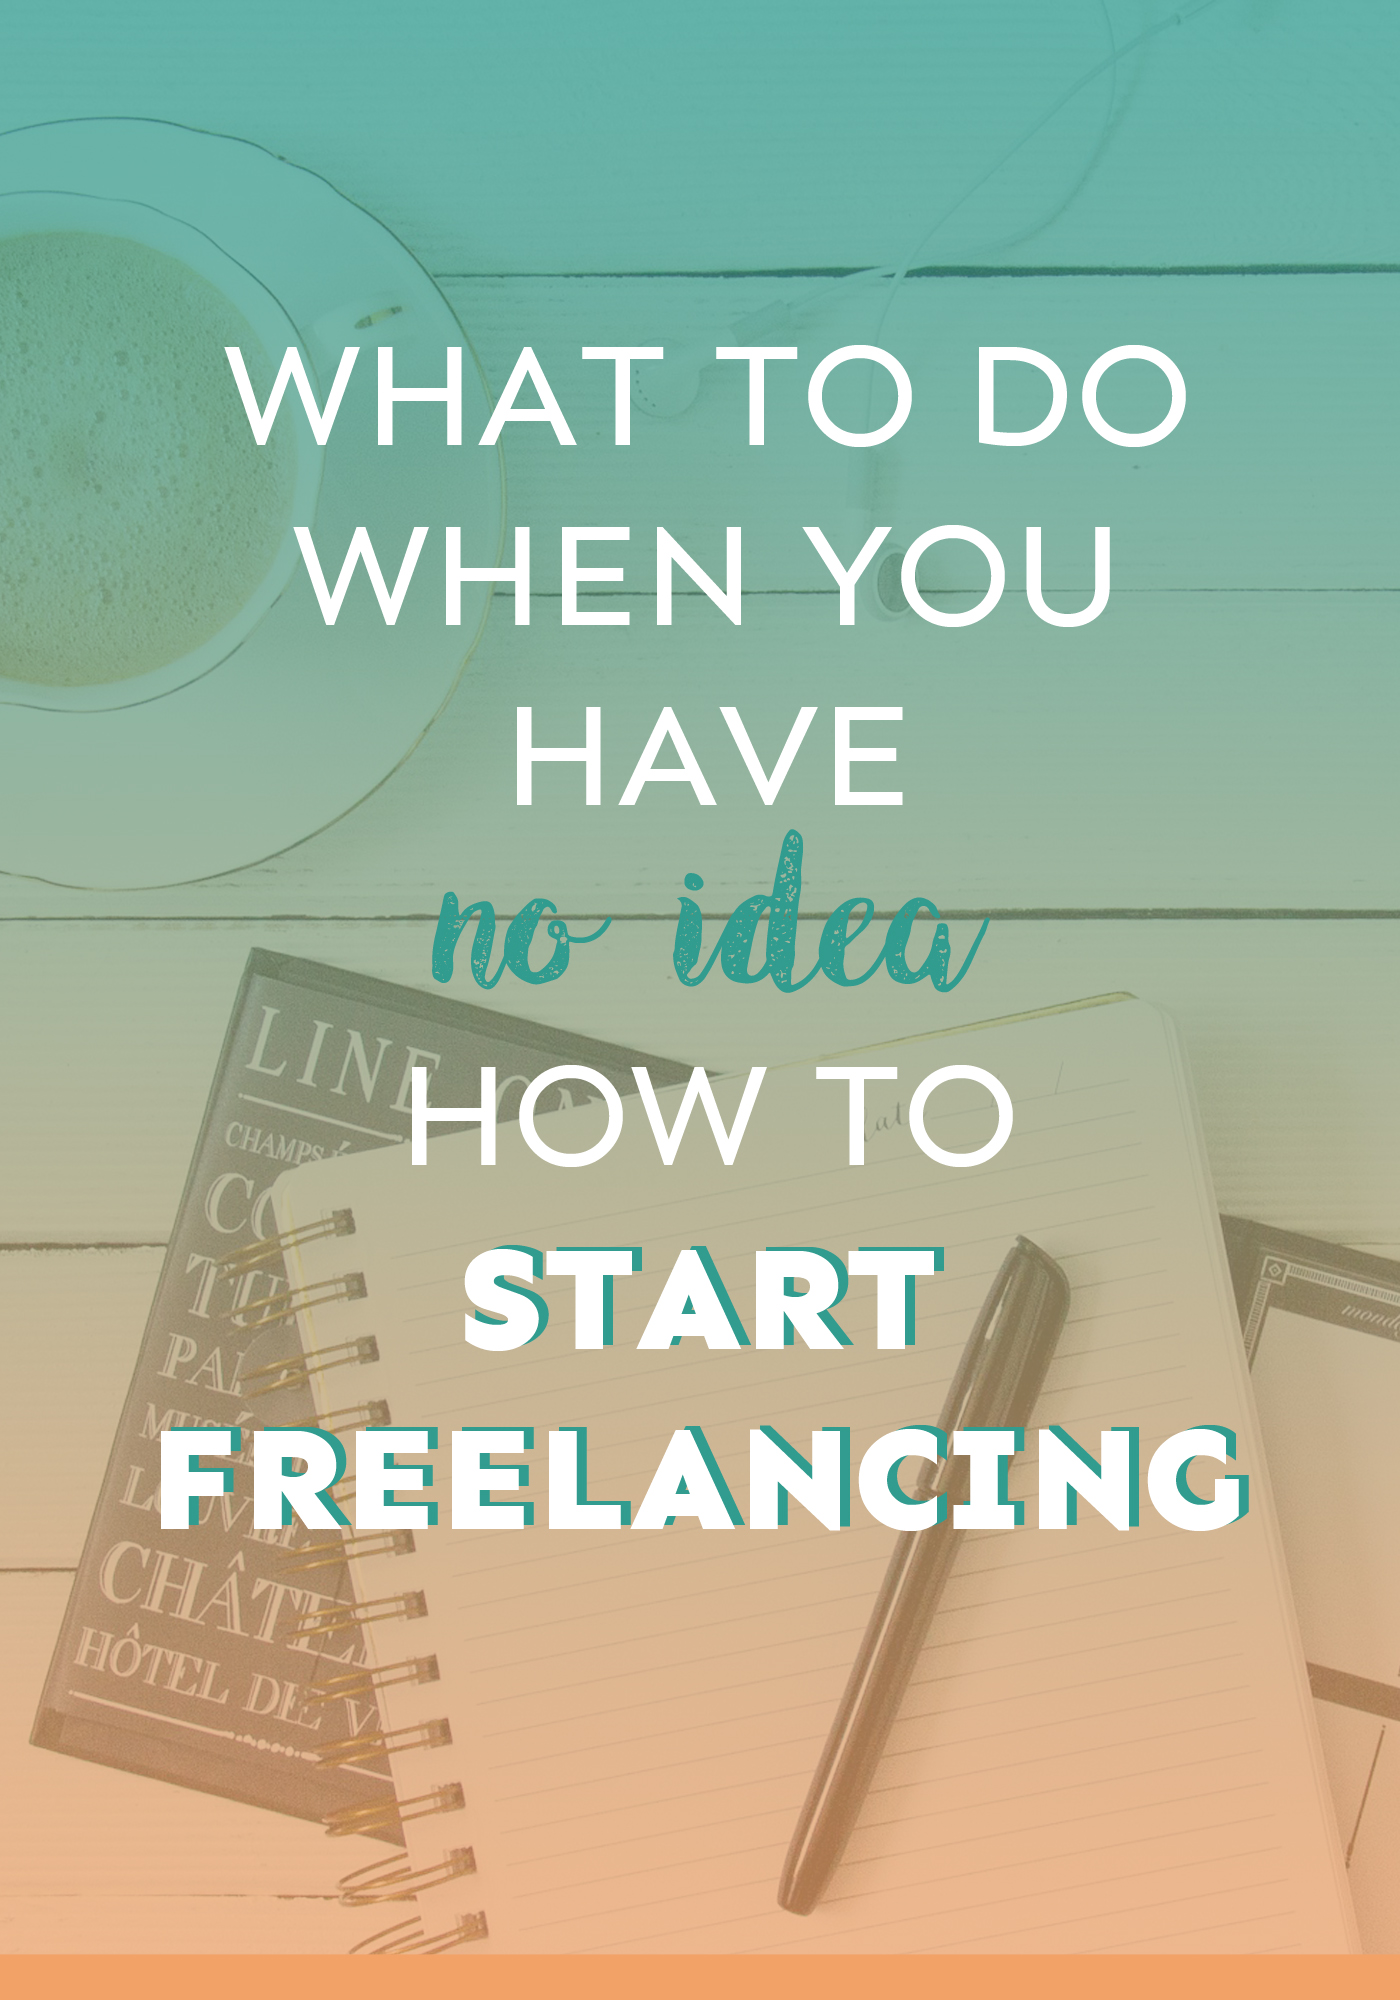 The first three things you should do before you start freelancing